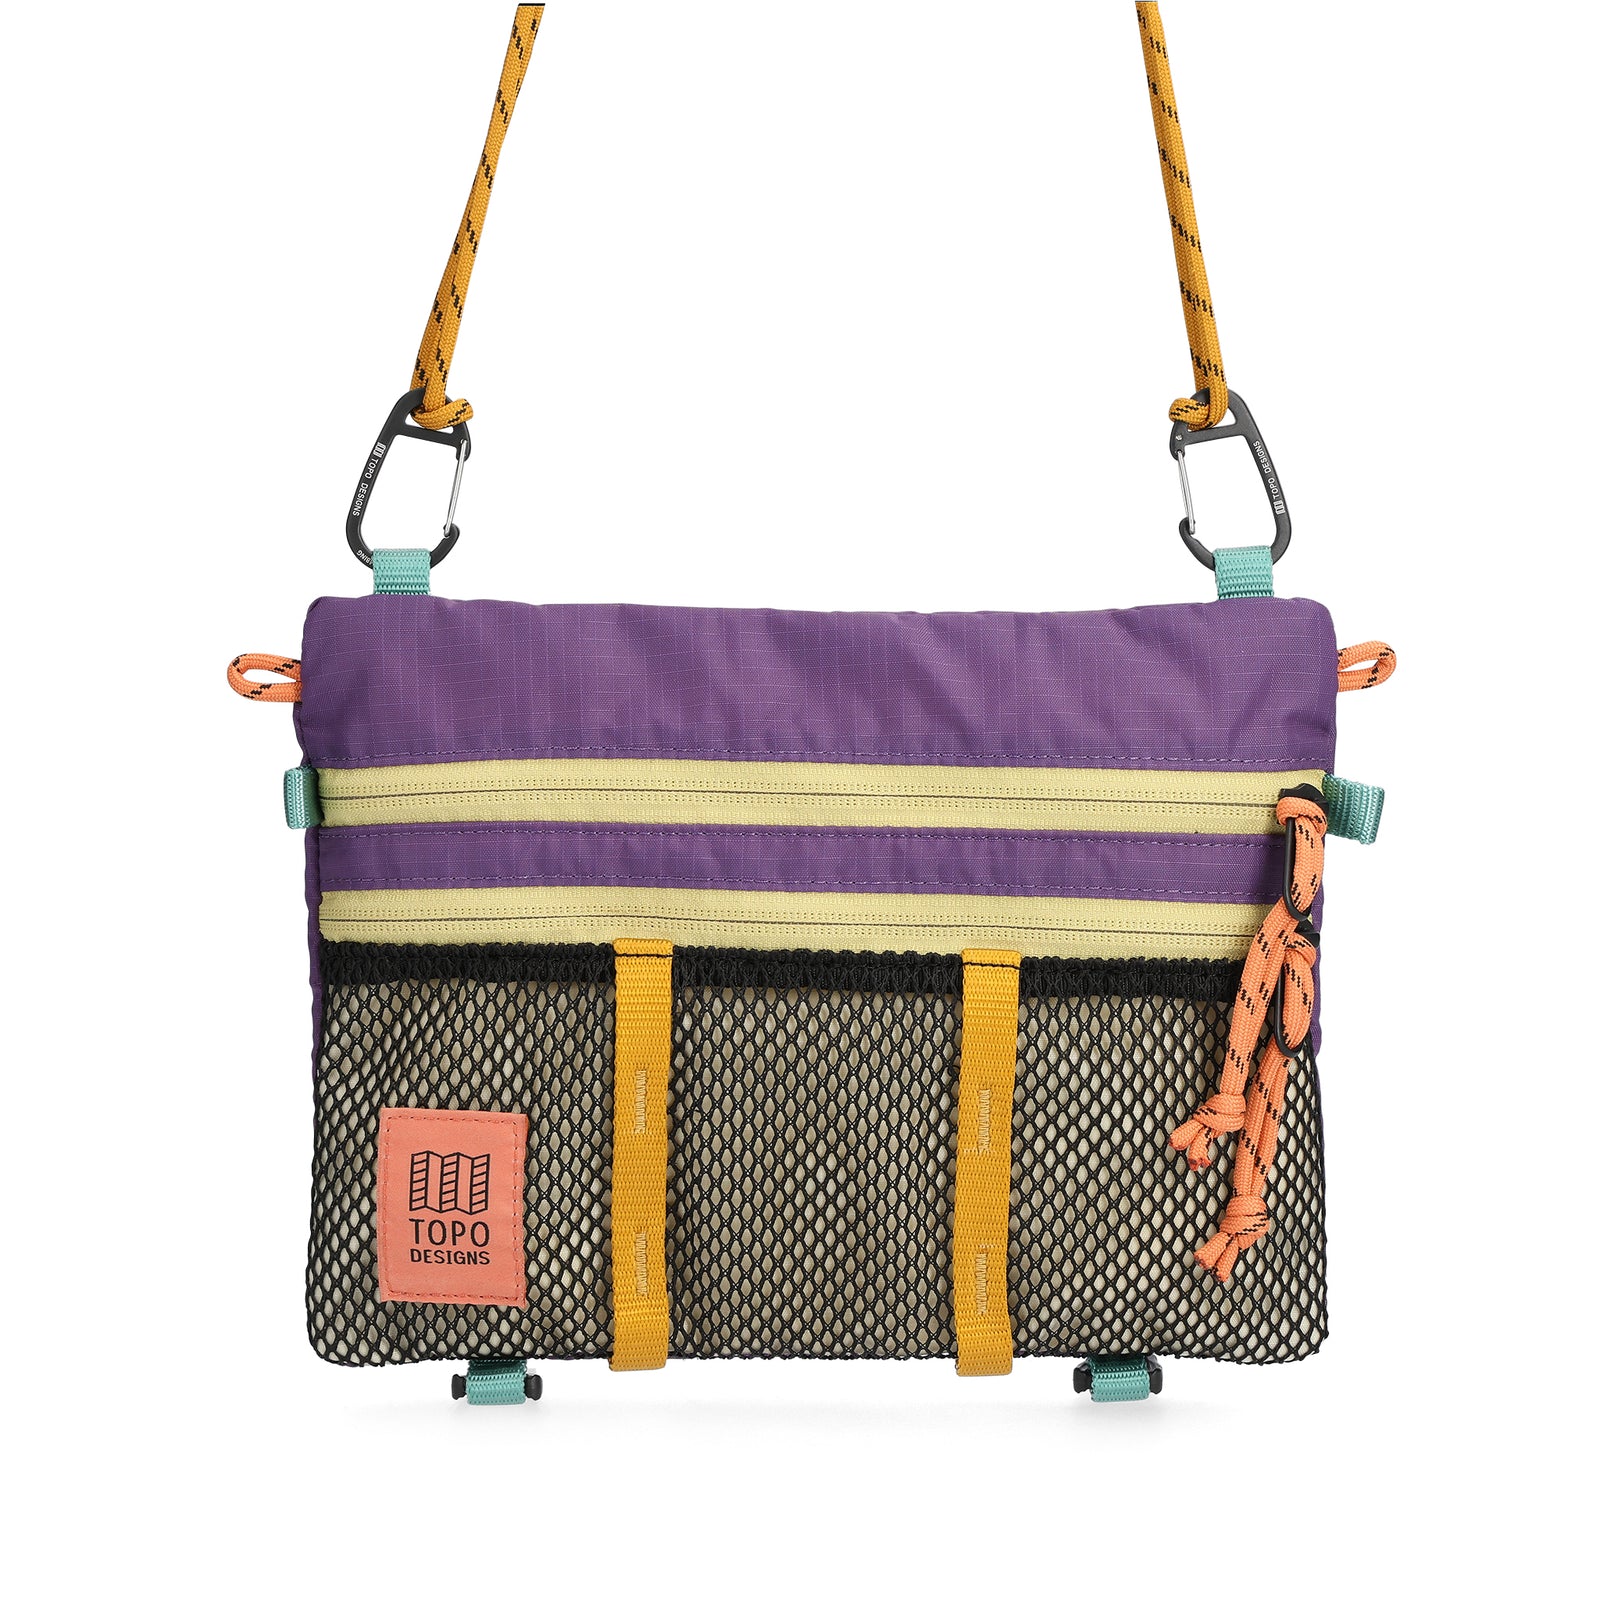 Front View of Topo Designs Mountain Accessory Shoulder Bag in "Loganberry / Bone White"